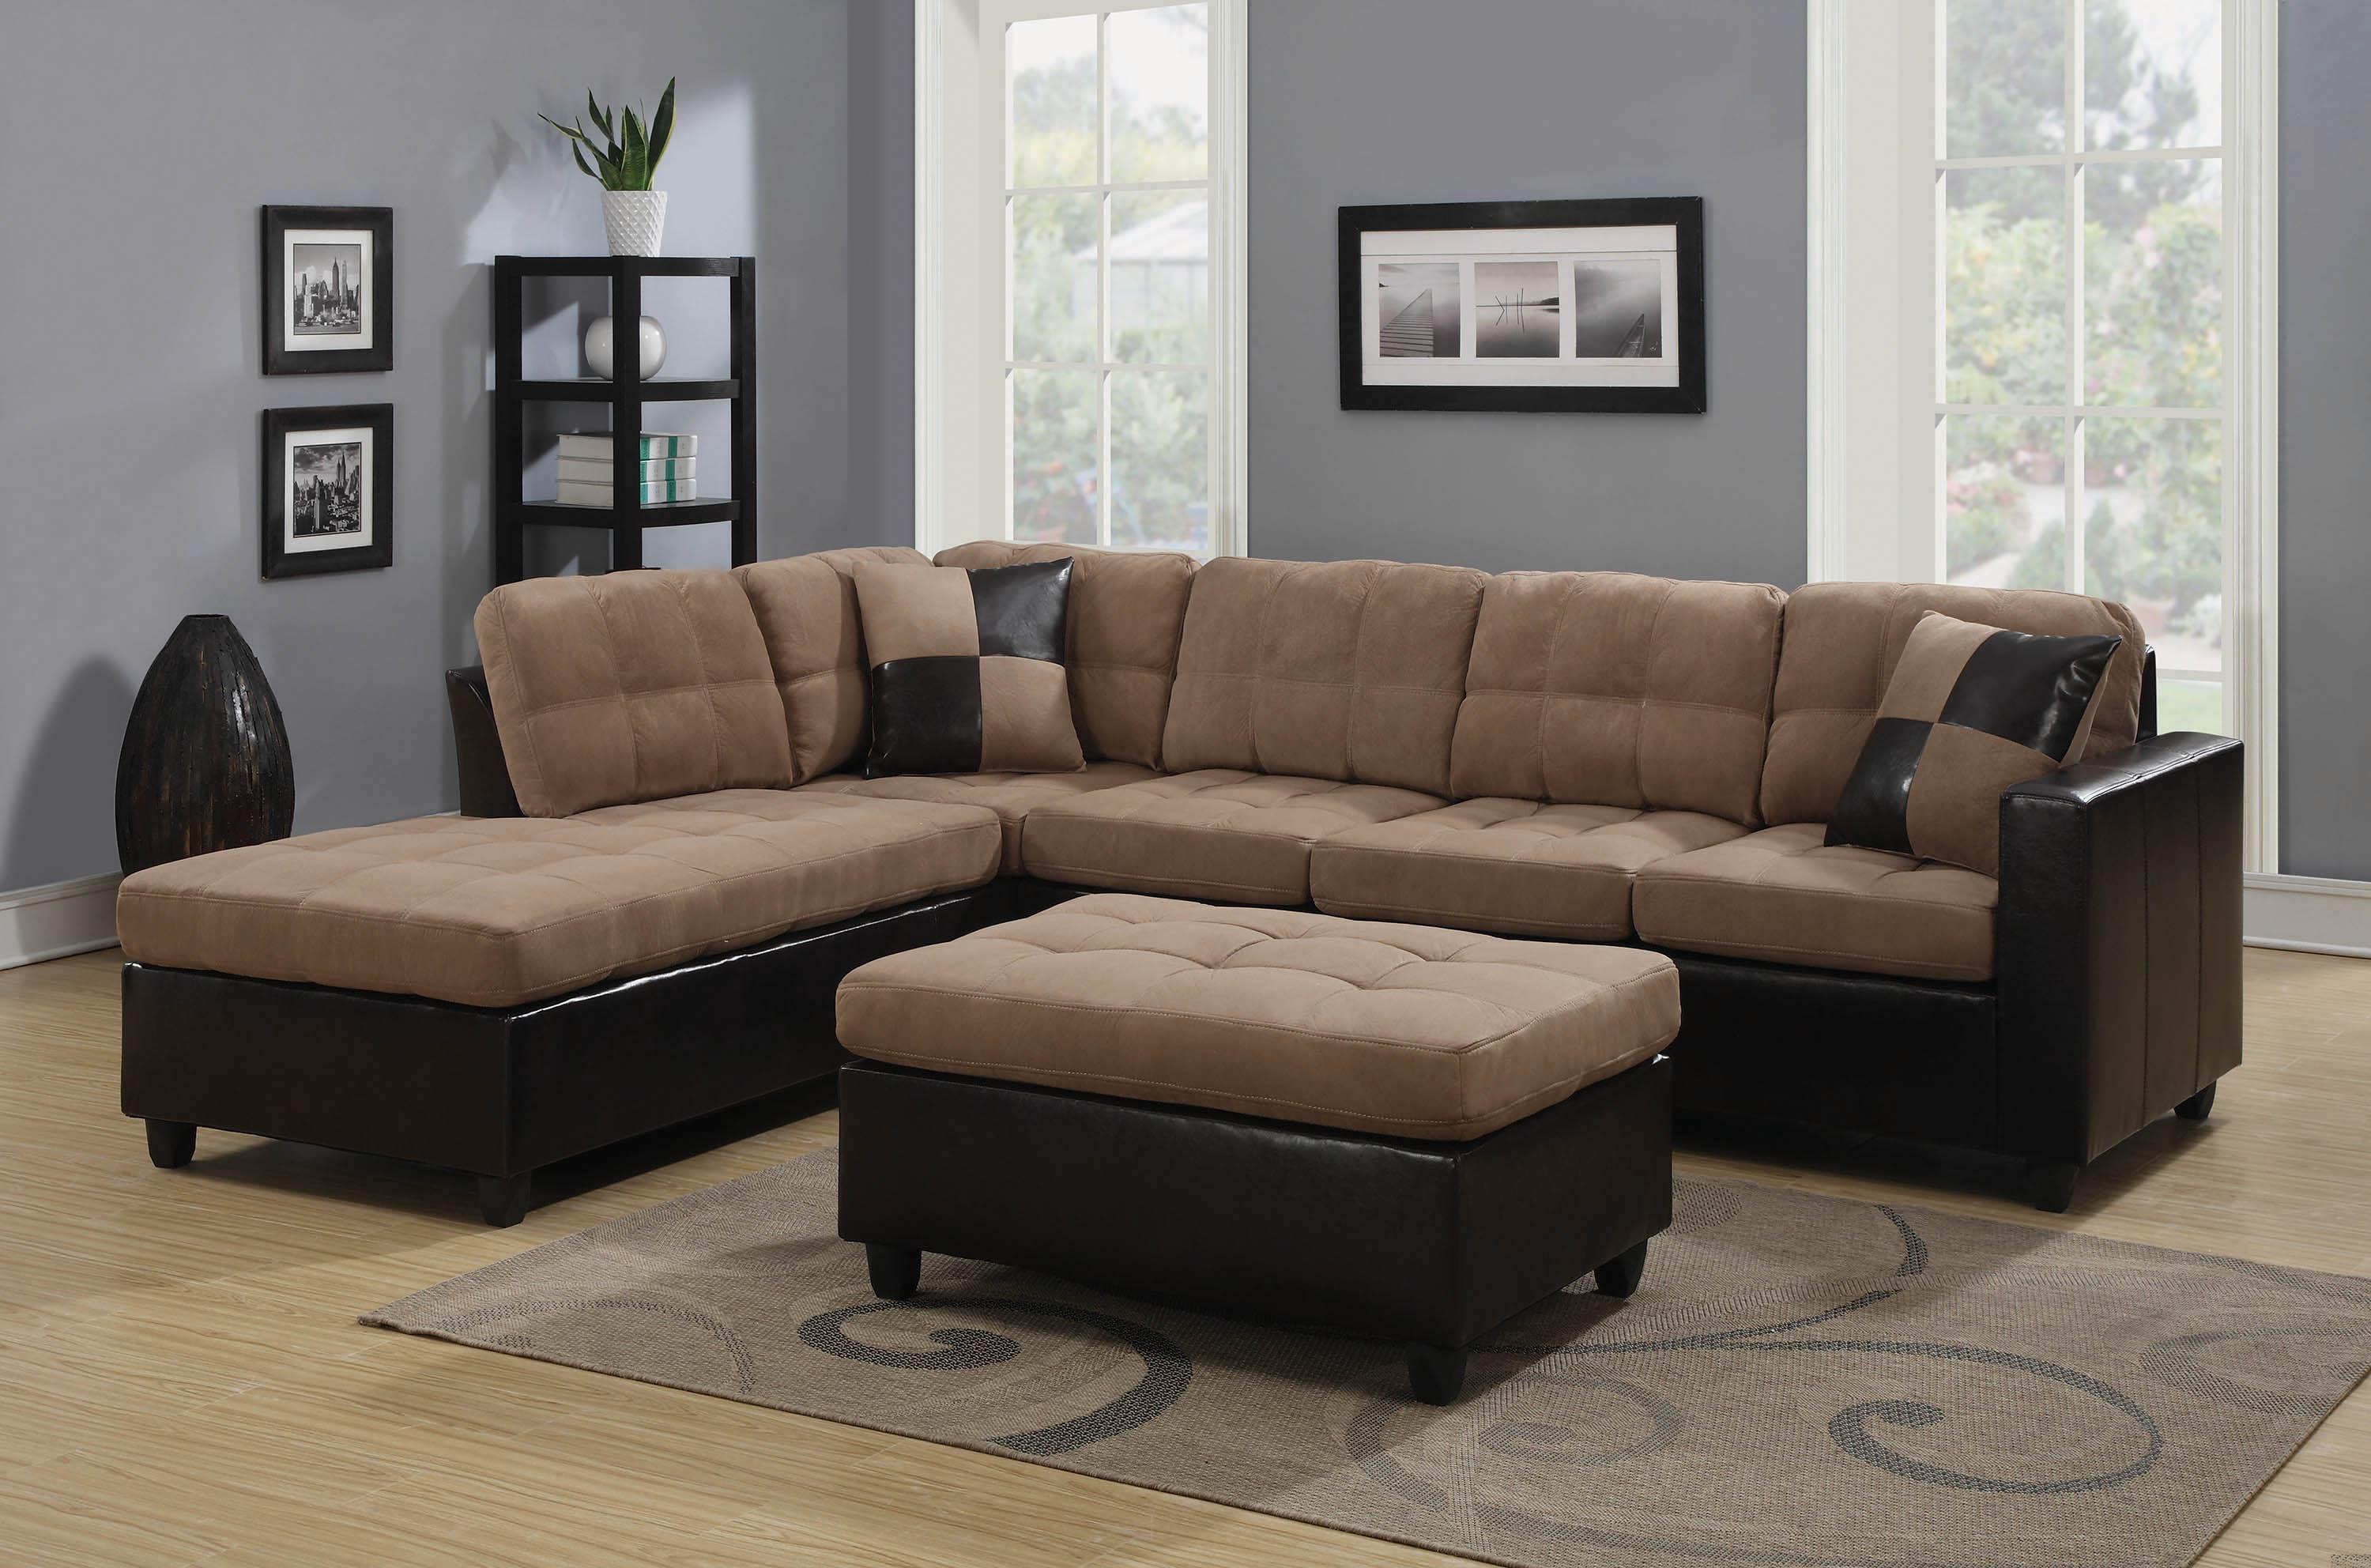 Contemporary Sectional 505675 Mallory 505675 in Tan Microfiber